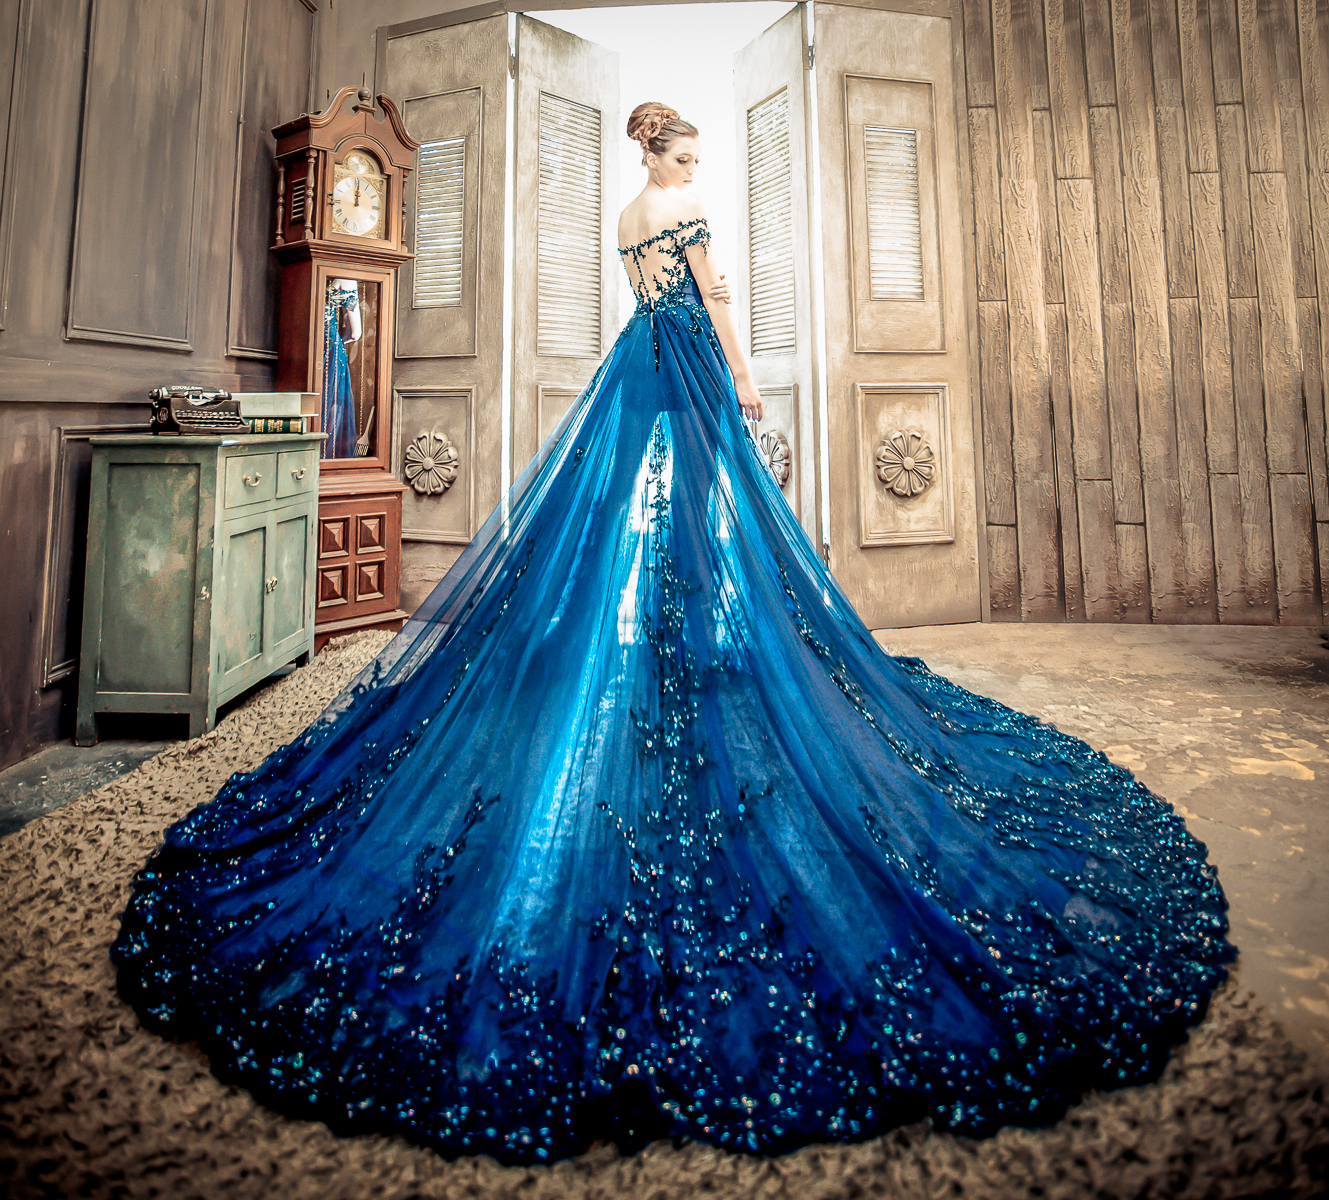 We can't help but drool over this jaw-dropping gown by No.9 Wedding!